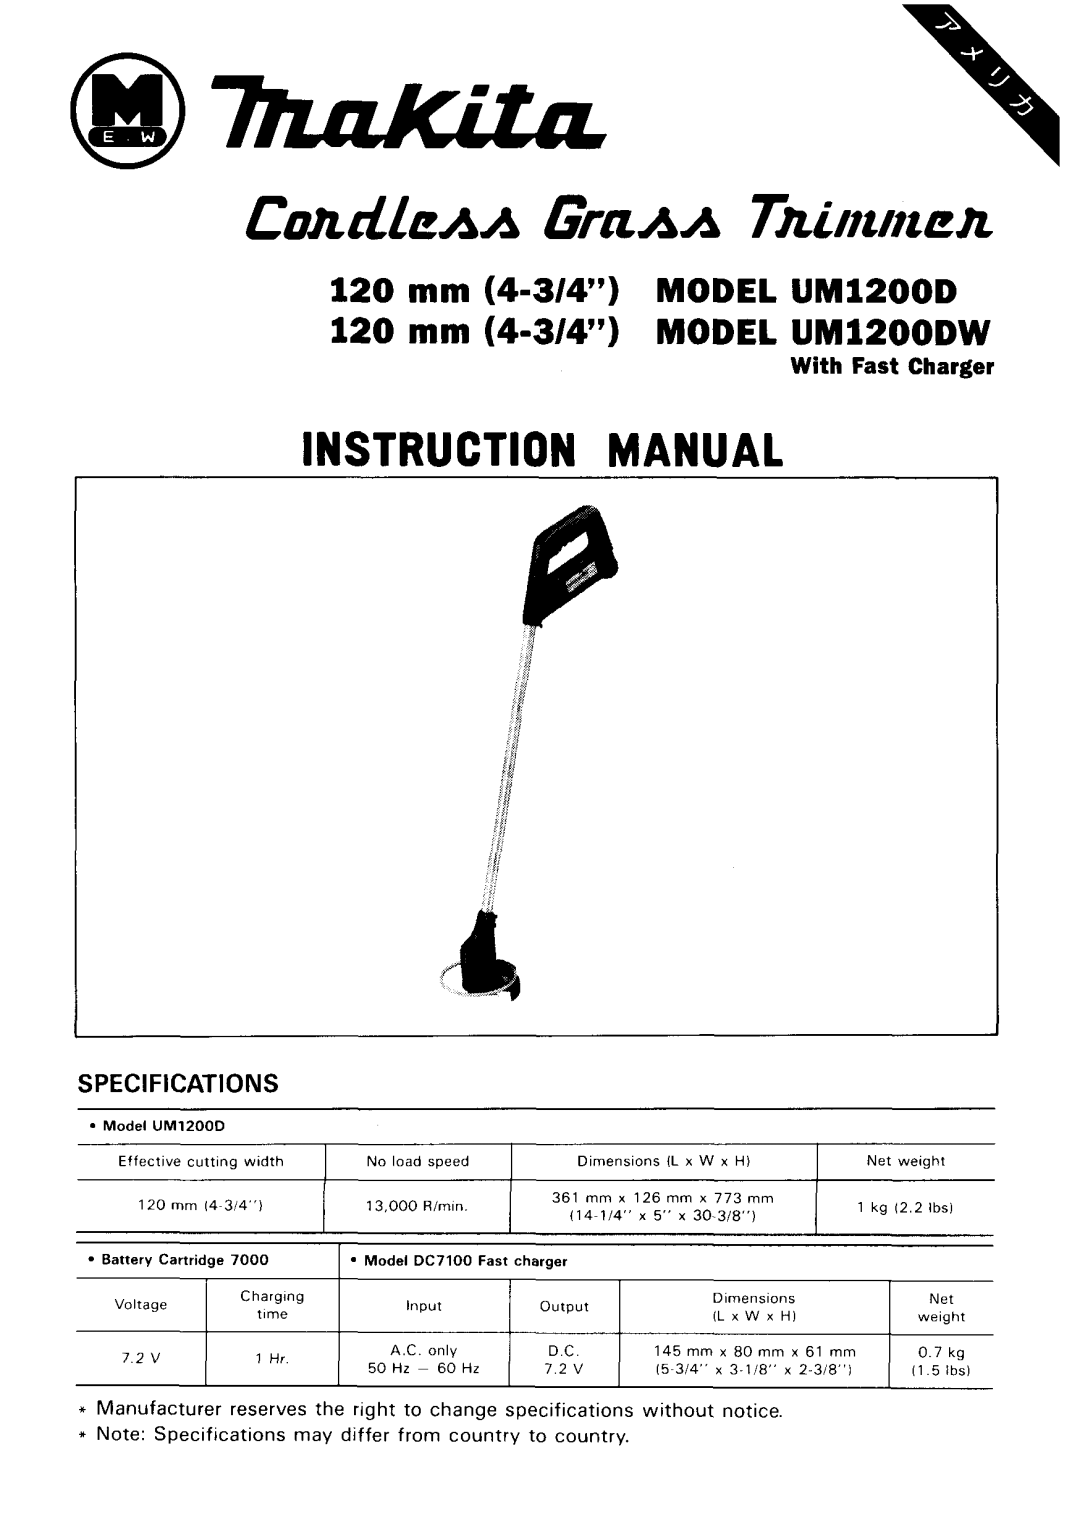 Makita UMLZOODW specifications Instruction Manual, With Fast Charger, 120 mm 4-314 MODEL UMlZOODW, SPECIFI CATI 0NS, m m 